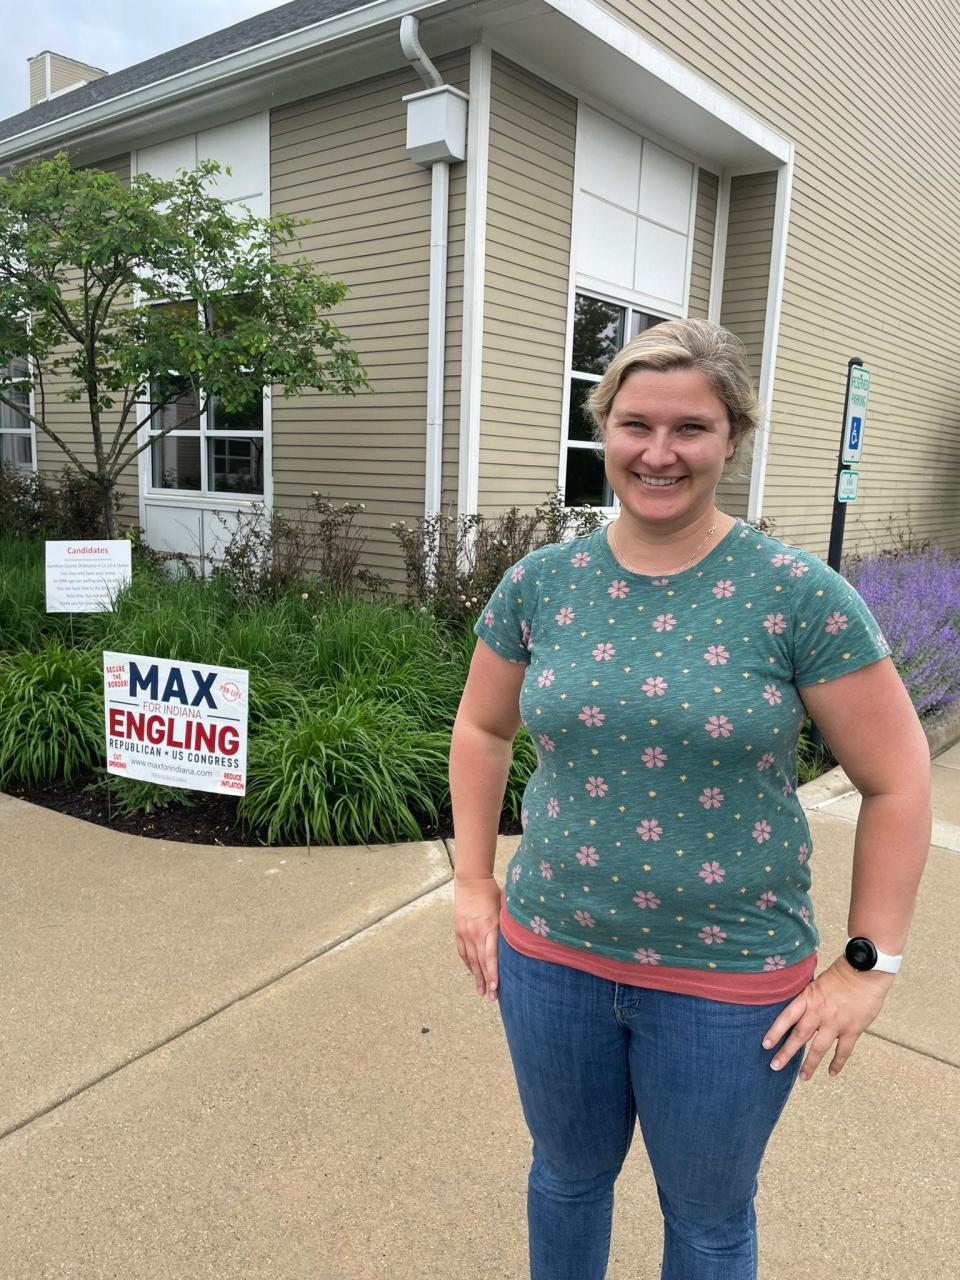 Jamie Zappala of Fishers said she wants to set a good example for her children about the importance of voting and respecting everyone’s opinions, even if they’re different.